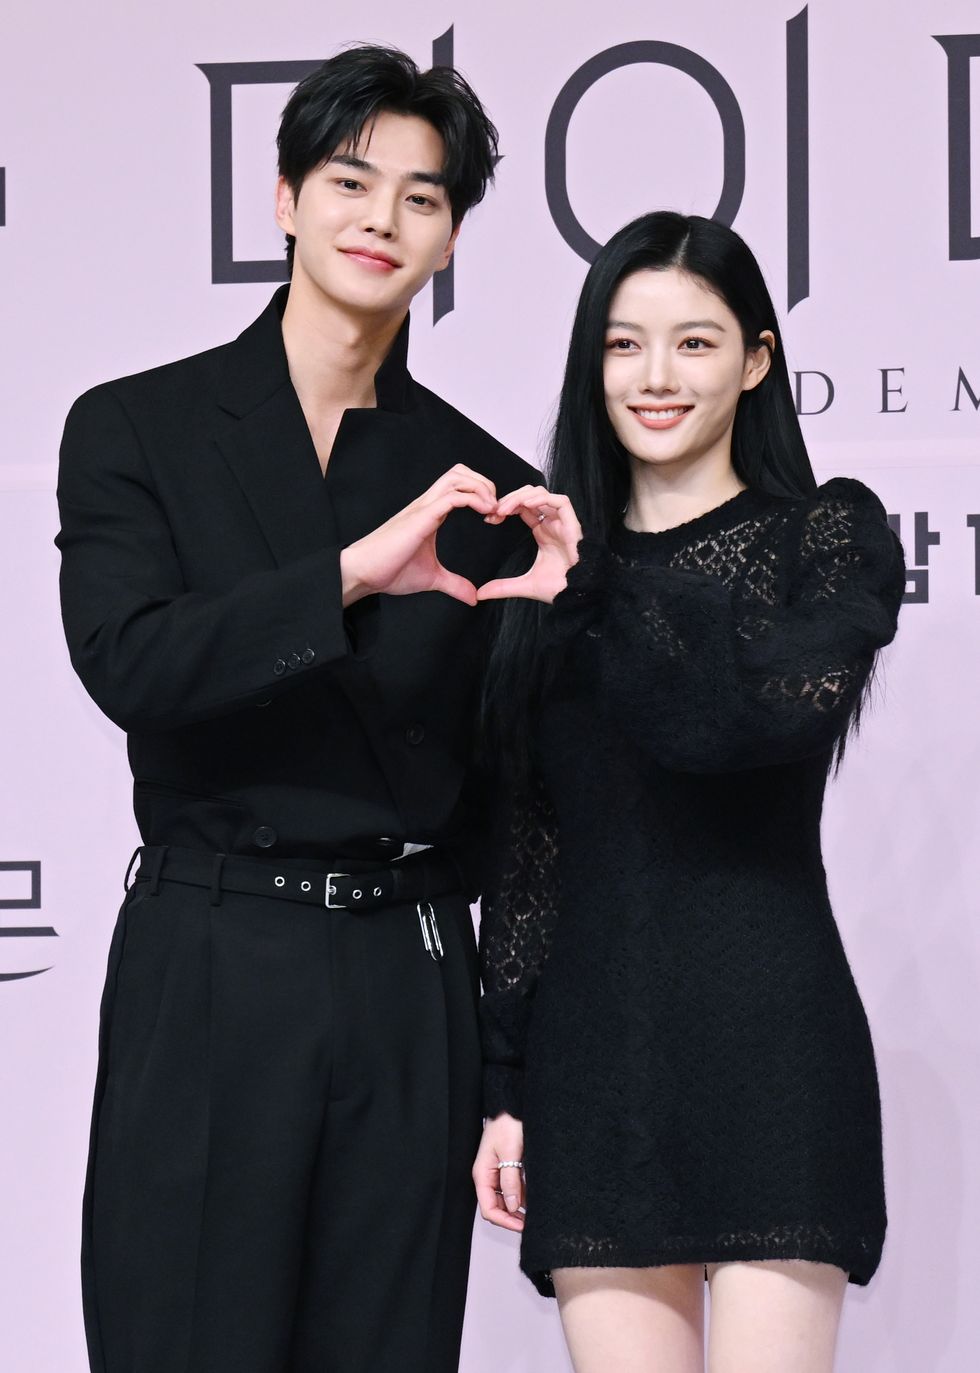 korean actor song kang and korean actress kim you jung attend my demon of production presentation at sbs building on november 24, 2023 in seoul, south korea 2023 11 24